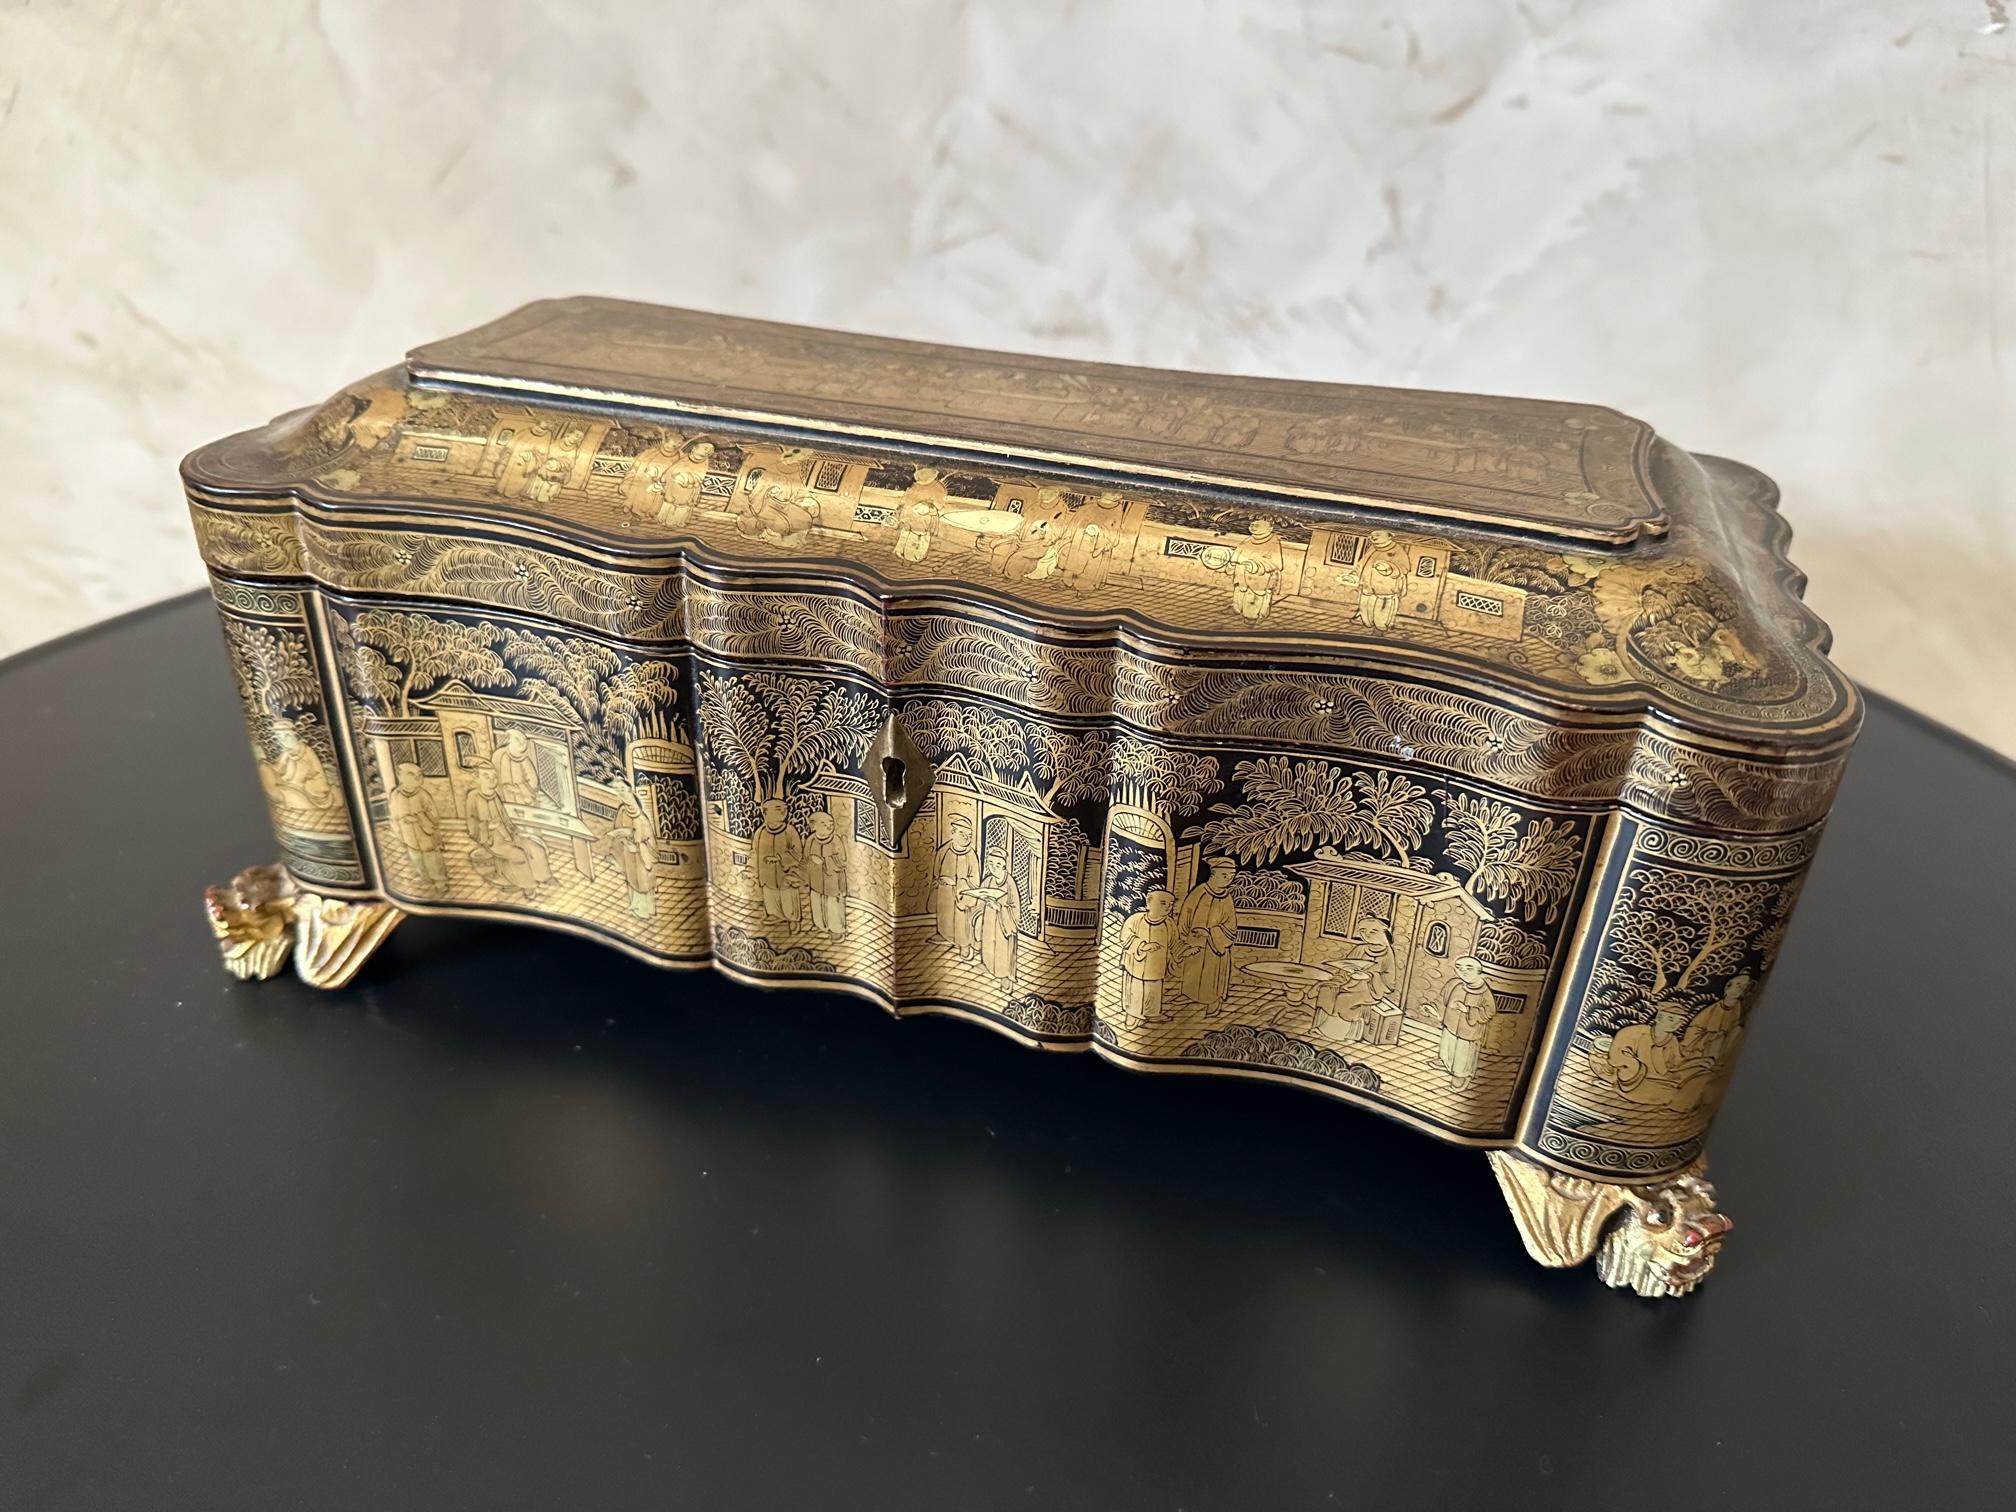 Magnificent box Napoleon III in lacquered wood and gold with hors d'oeuvres or cheese in silver and mother-of-pearl handle with monogram.
Hallmark of the master goldsmith Touron in Paris, guarantee hallmark, old man's hallmark from 1819-1838.
The